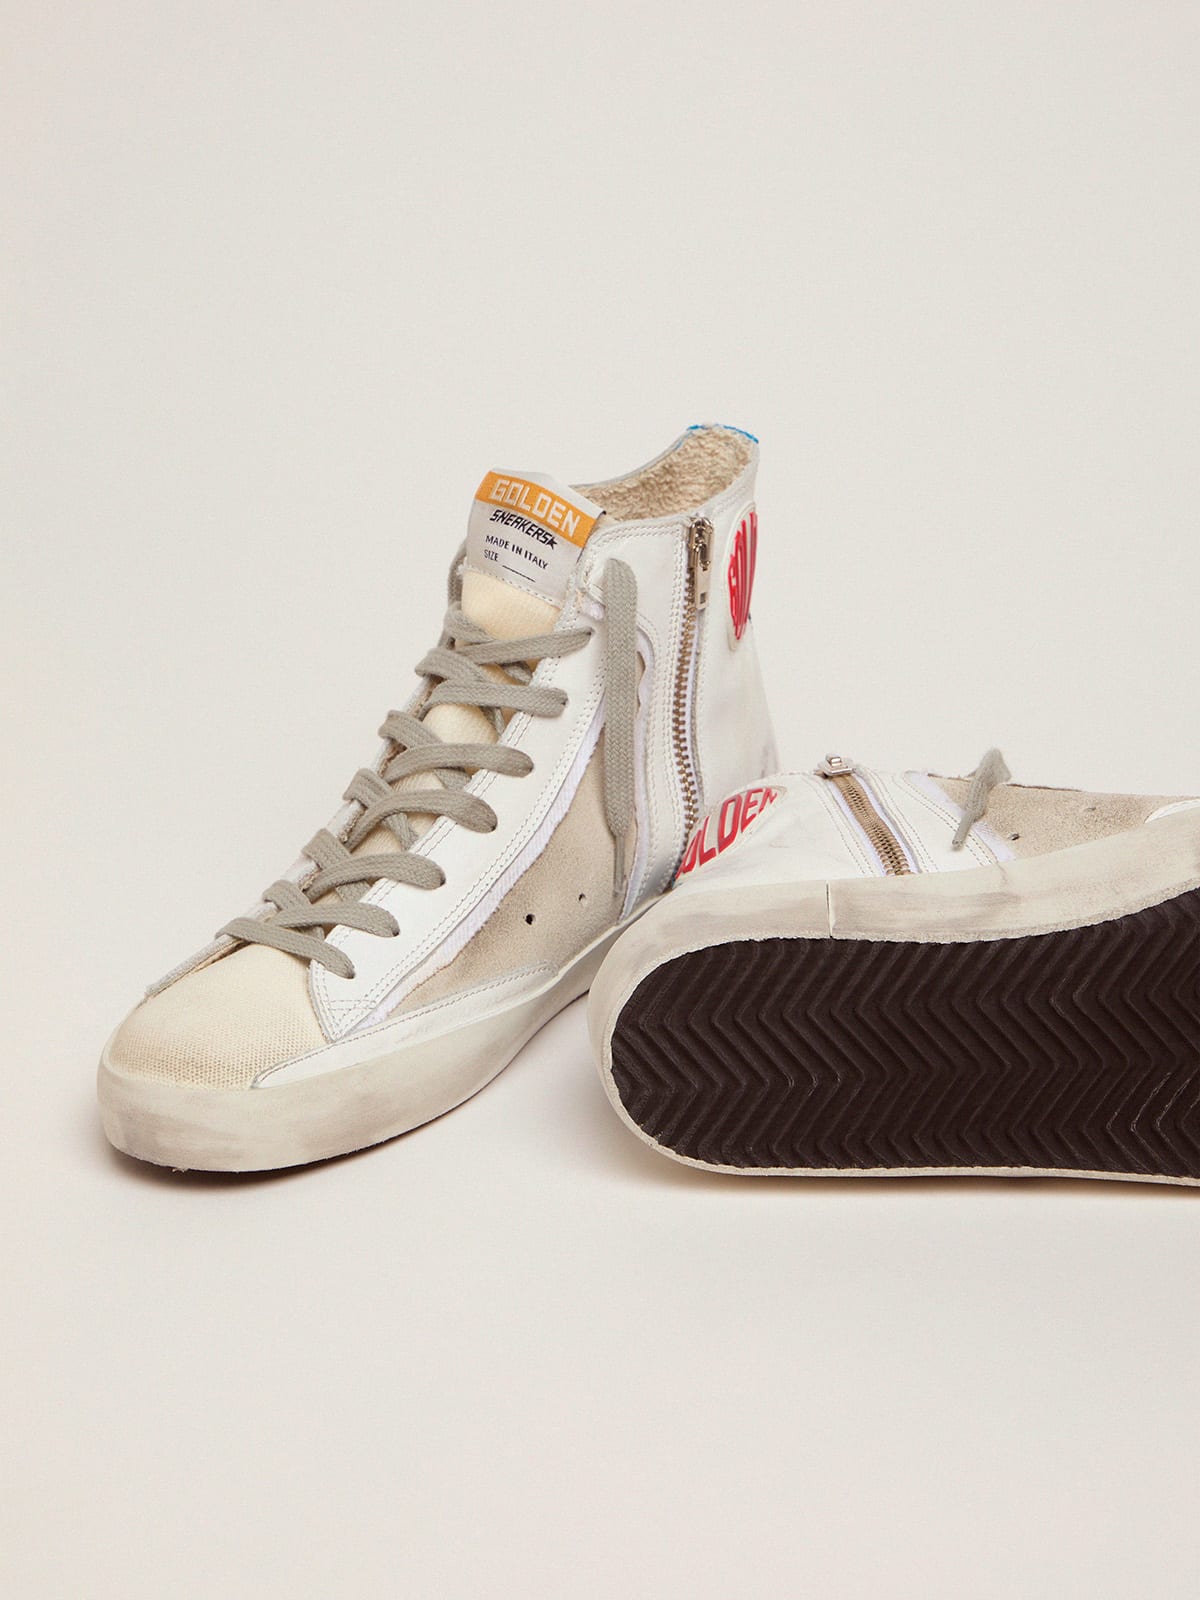 Golden Goose - Women's Limited Edition blue and white Francy sneakers in 